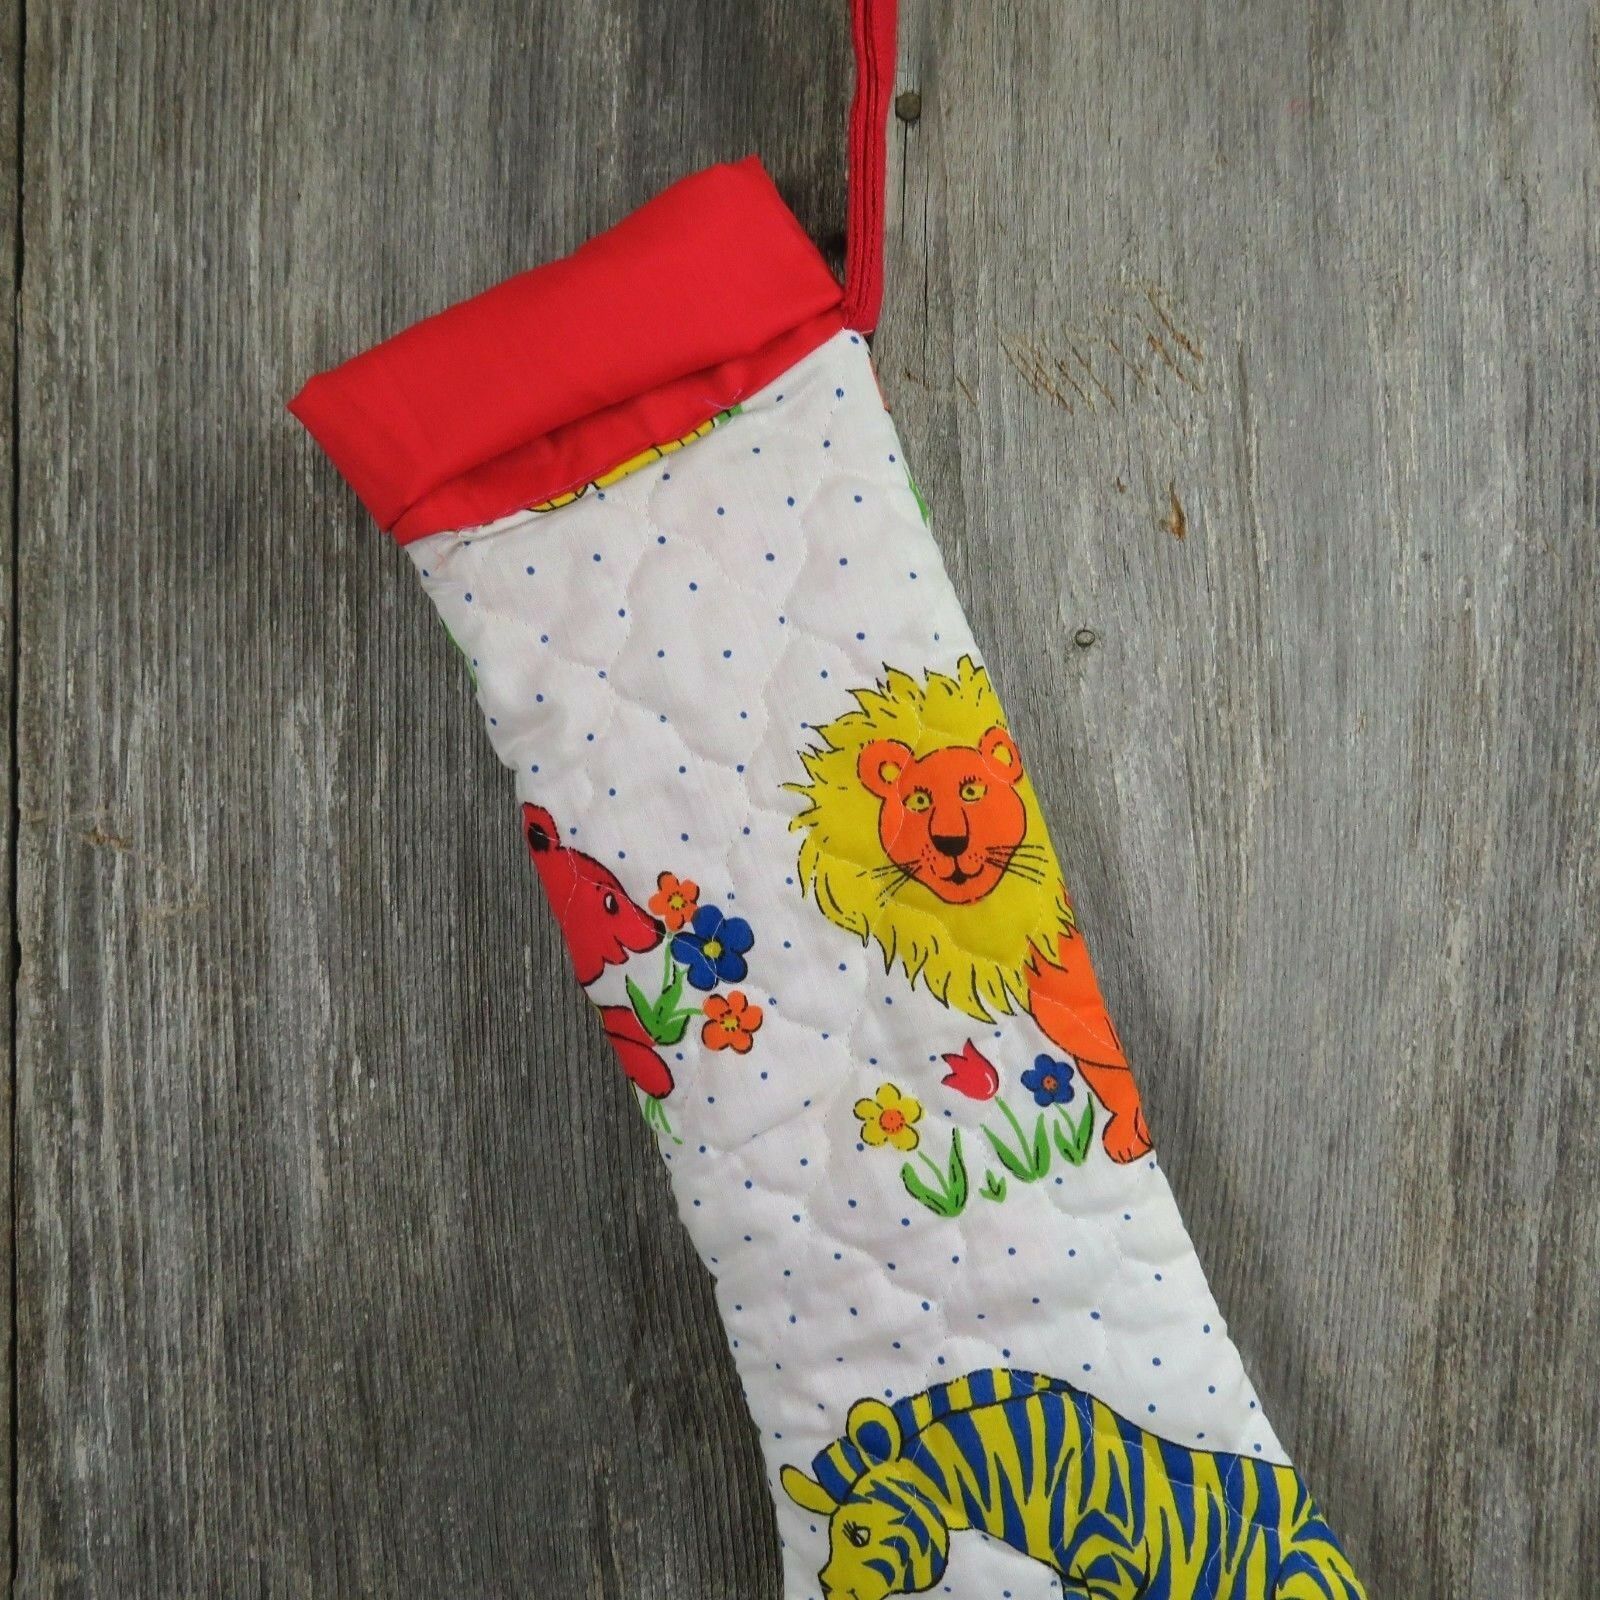 Vintage Christmas Stocking Quilted Jungle Animals Handmade Fabric Lion Tiger - At Grandma's Table